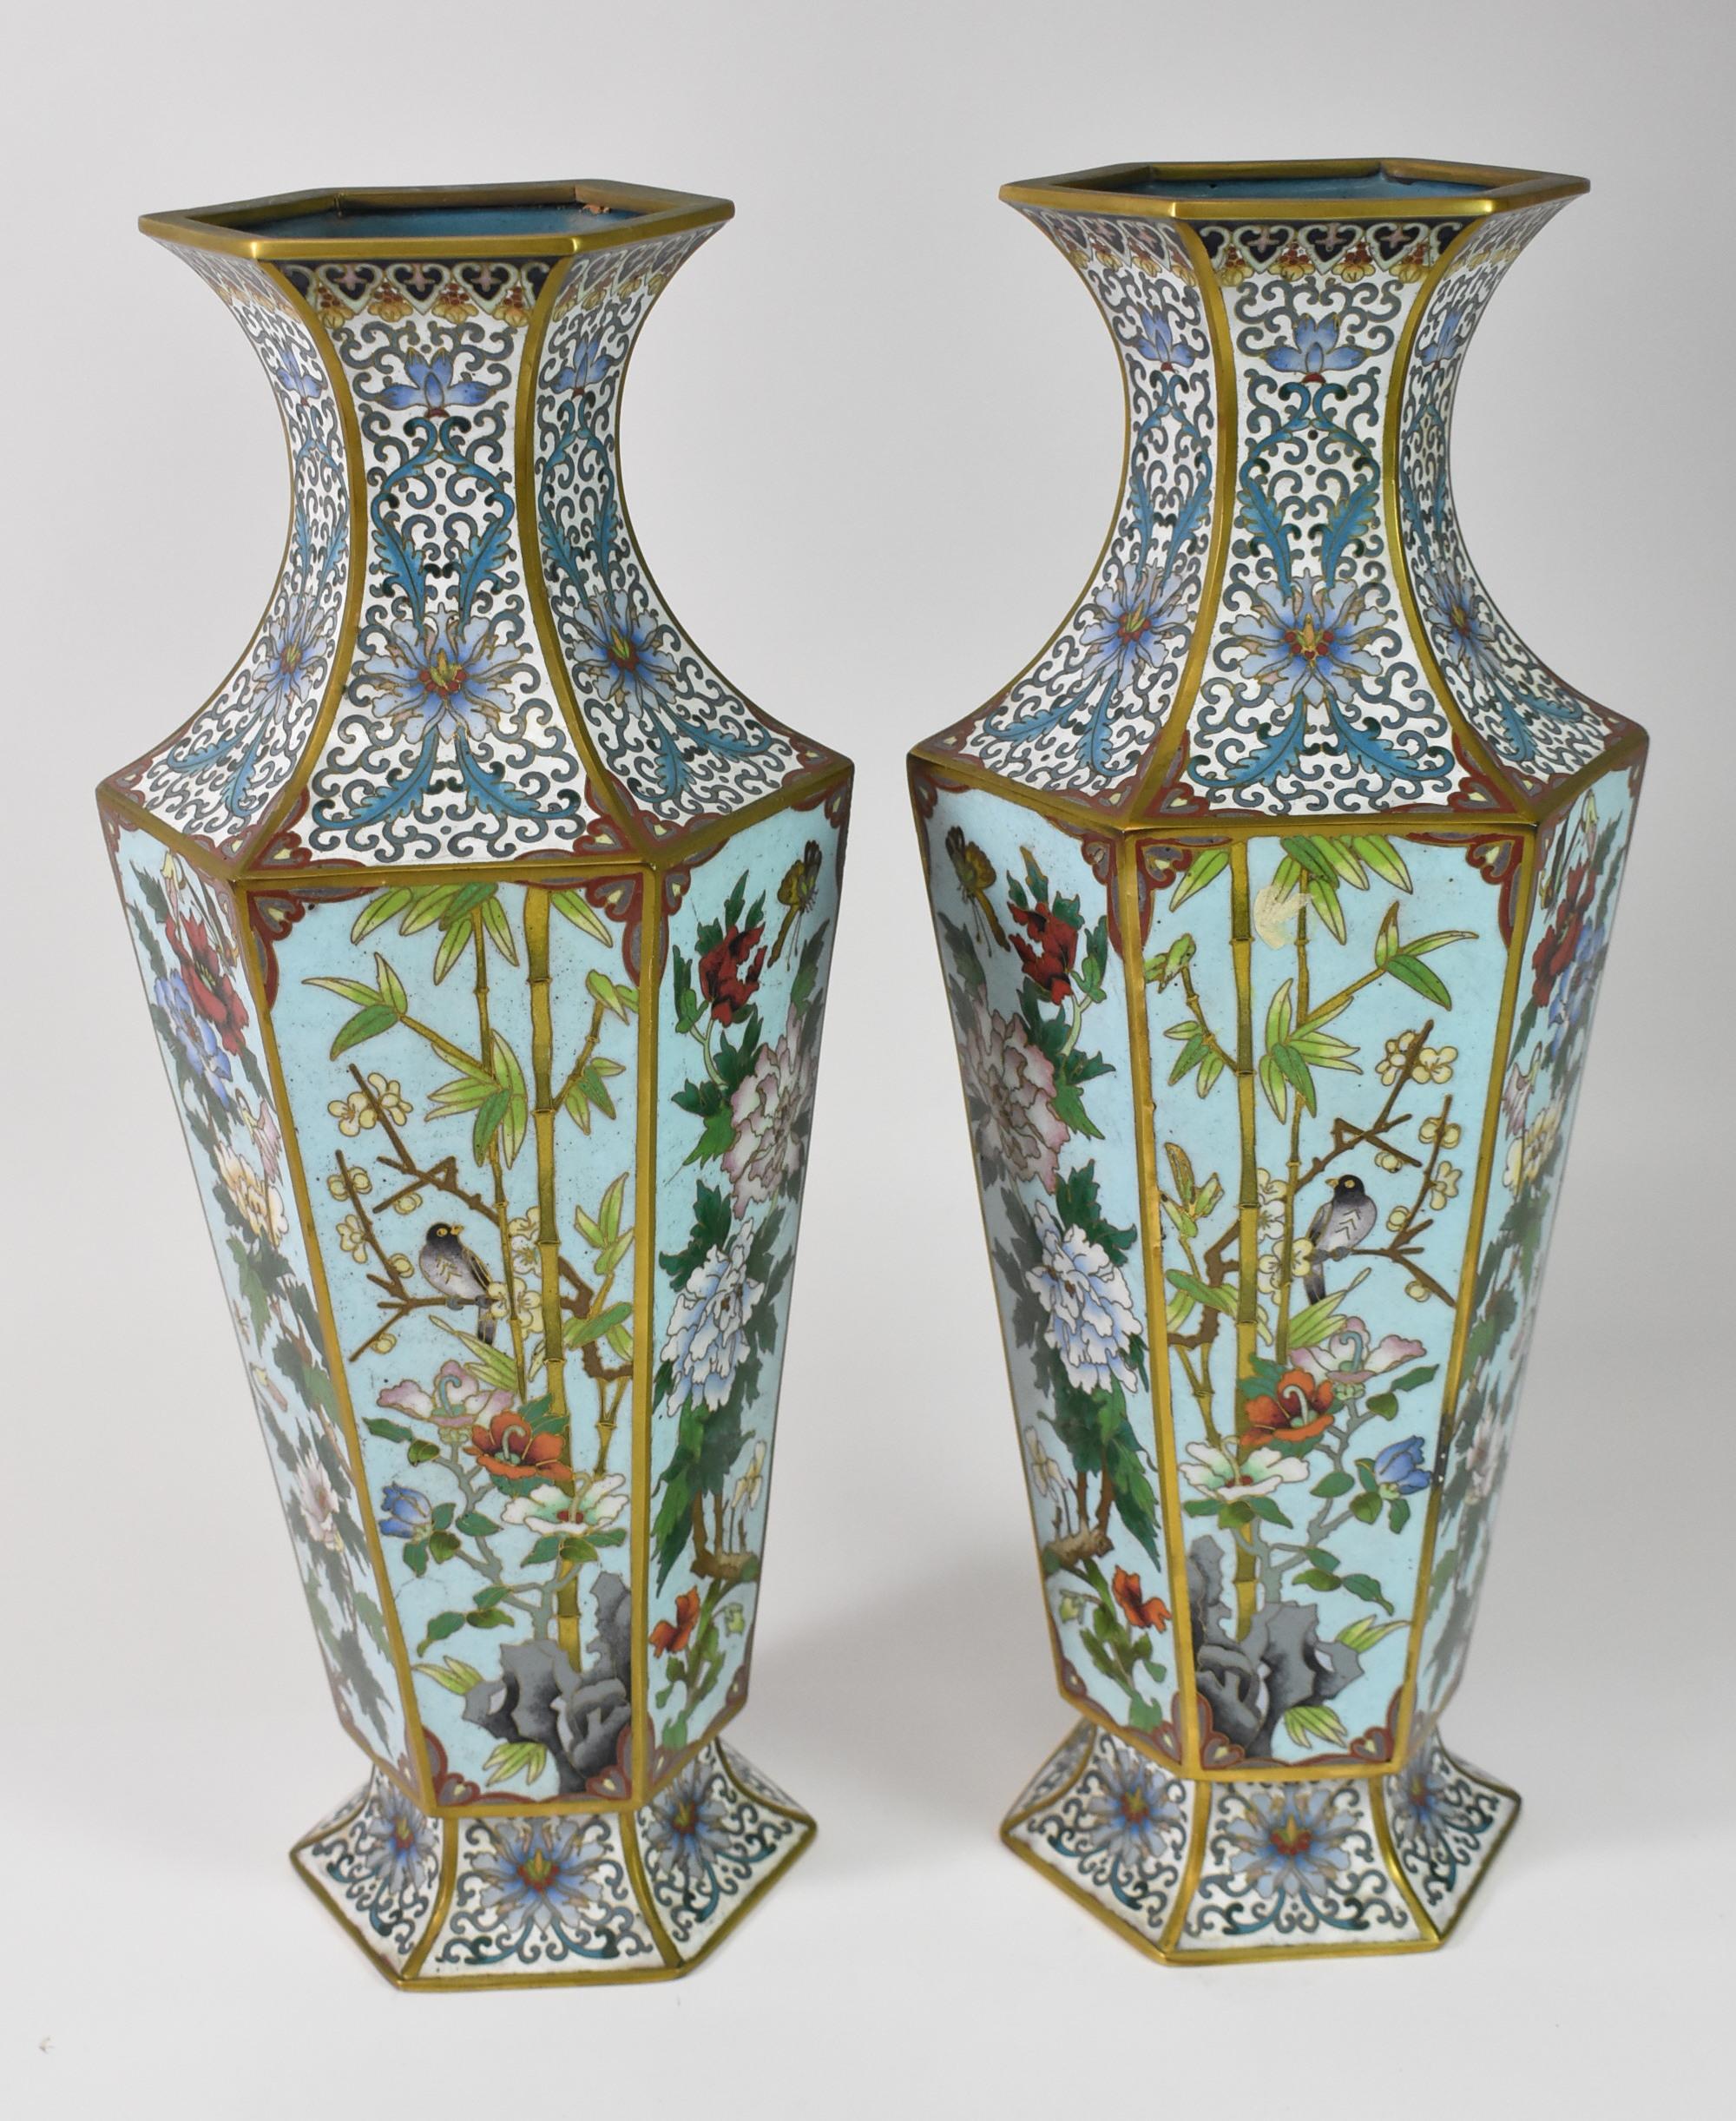 Pair of French Victorian Cloisonné Vases. 19th Century, Victorian period, France origin. Chinoiseries Blue enamel on porcelain with bird foliage and butterflies. Hexagon shape. Great condition. Dimensions: 15.5